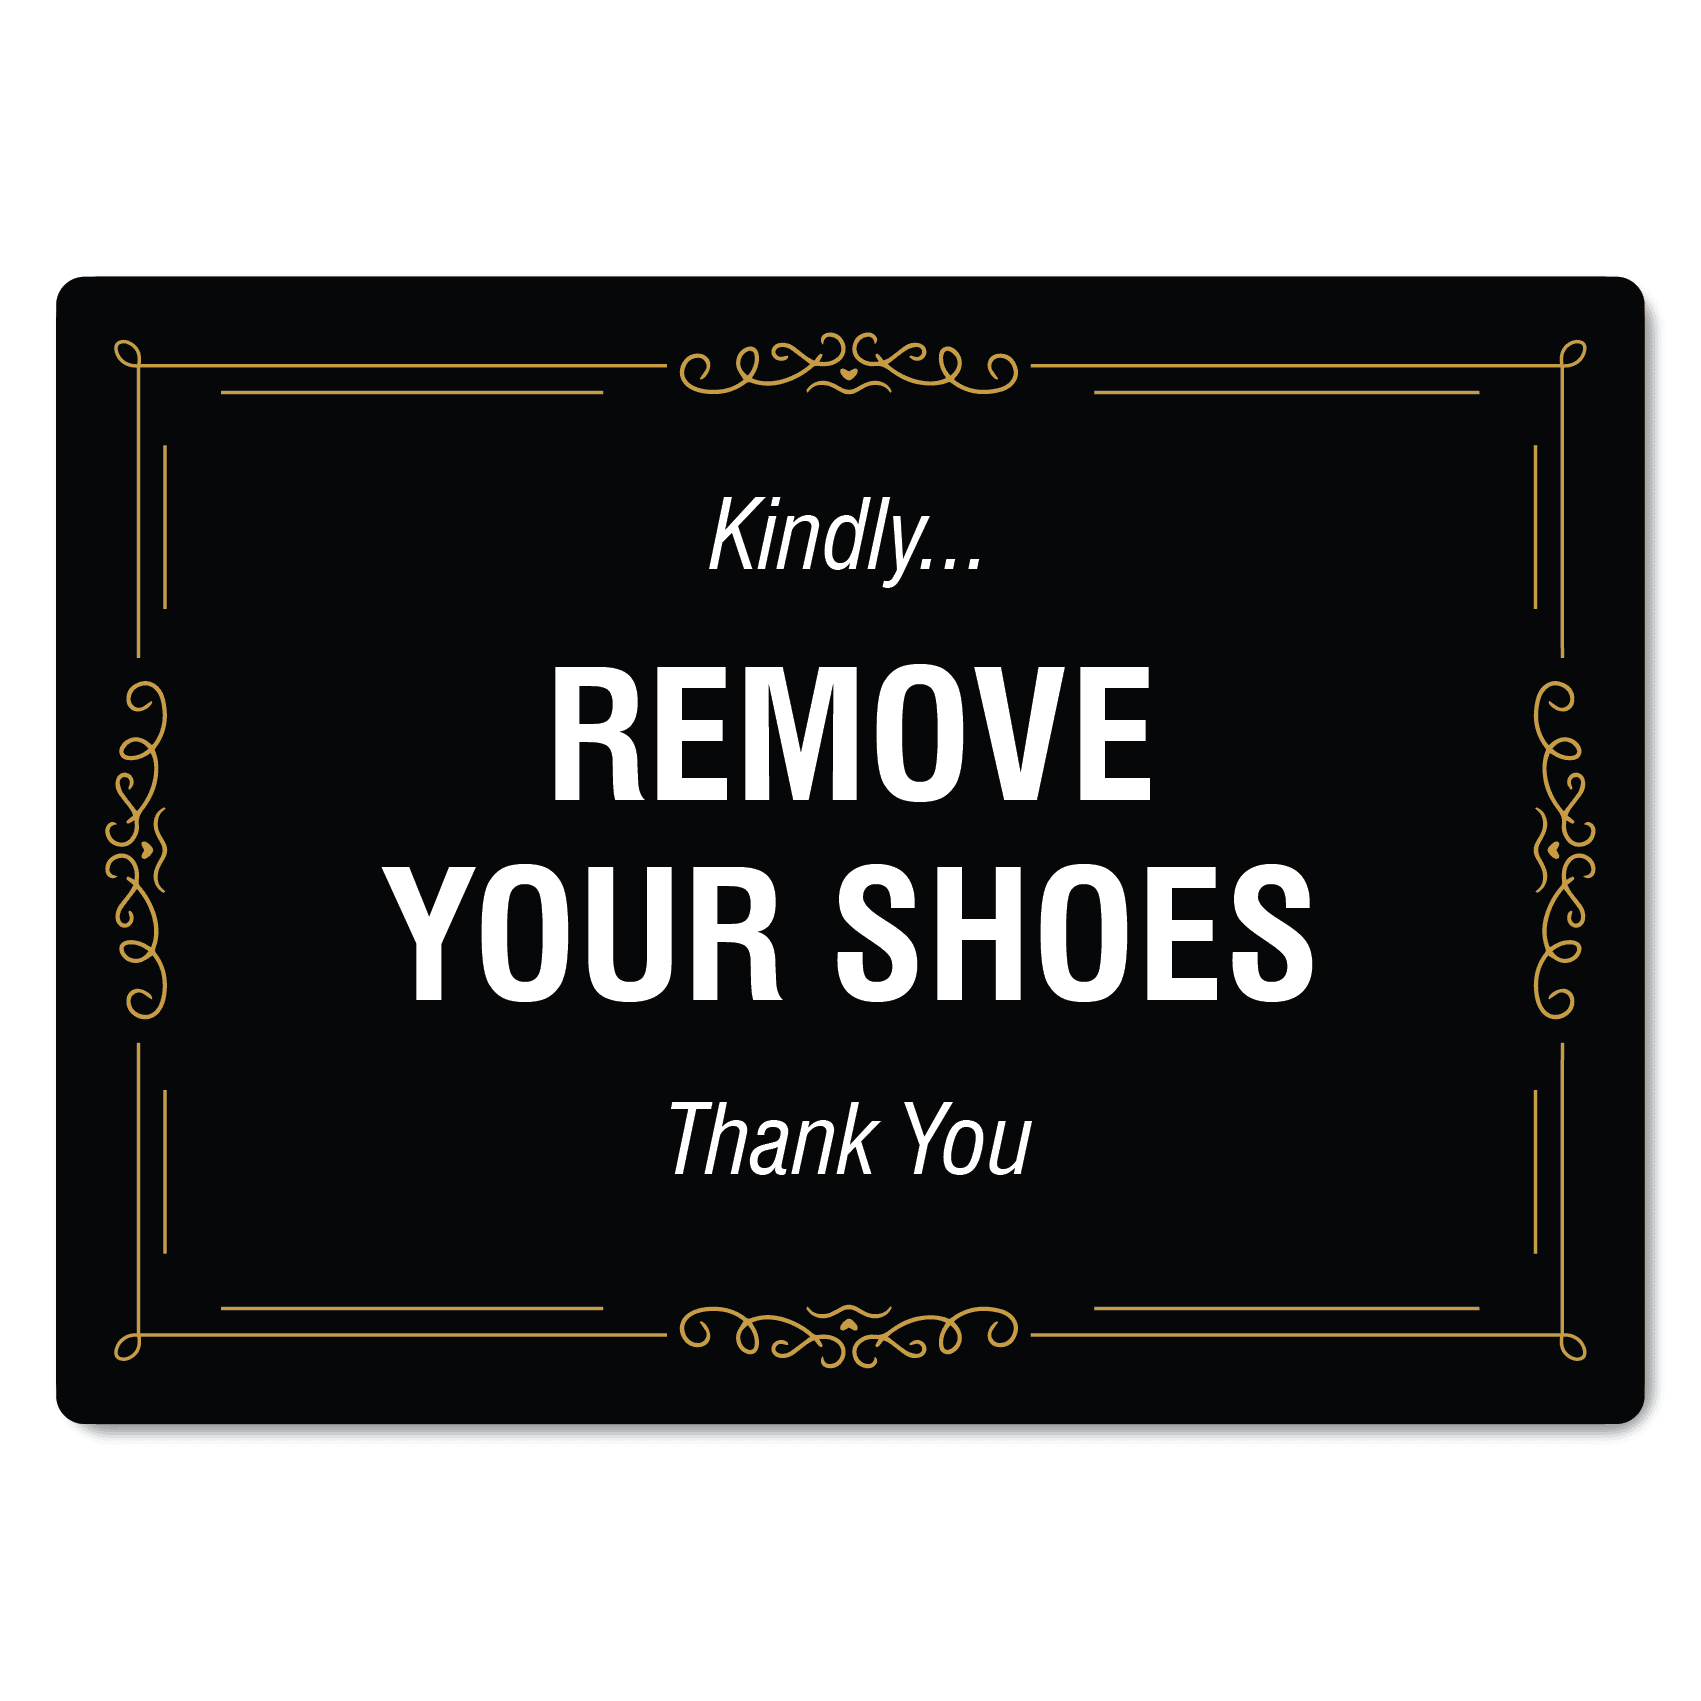 https://www.thesignmaker.co.nz/wp-content/uploads/2020/06/PR24_Kindly-Remove-Your-Shoes-Thank-You.png